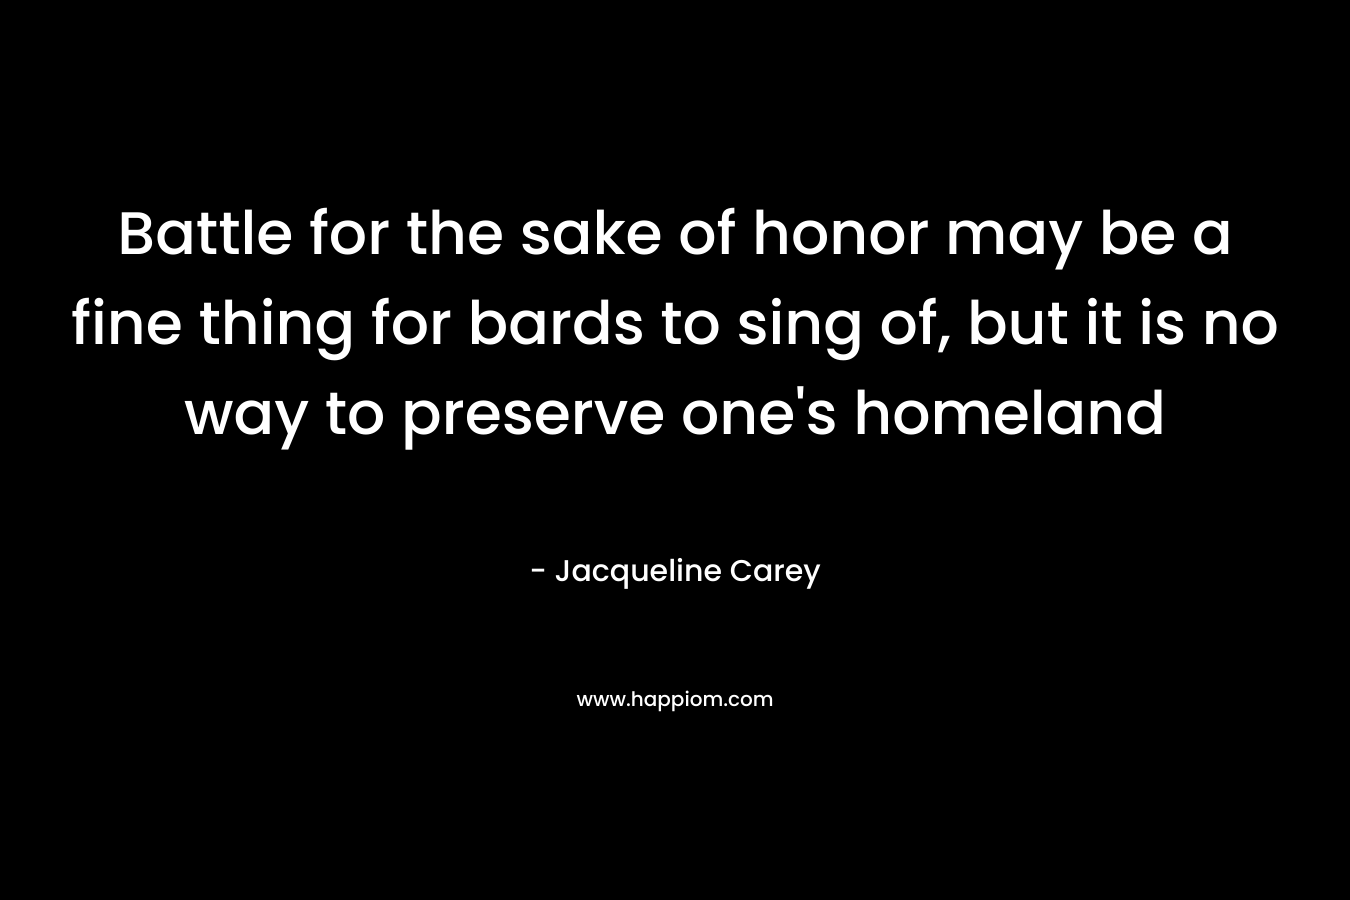 Battle for the sake of honor may be a fine thing for bards to sing of, but it is no way to preserve one’s homeland – Jacqueline Carey